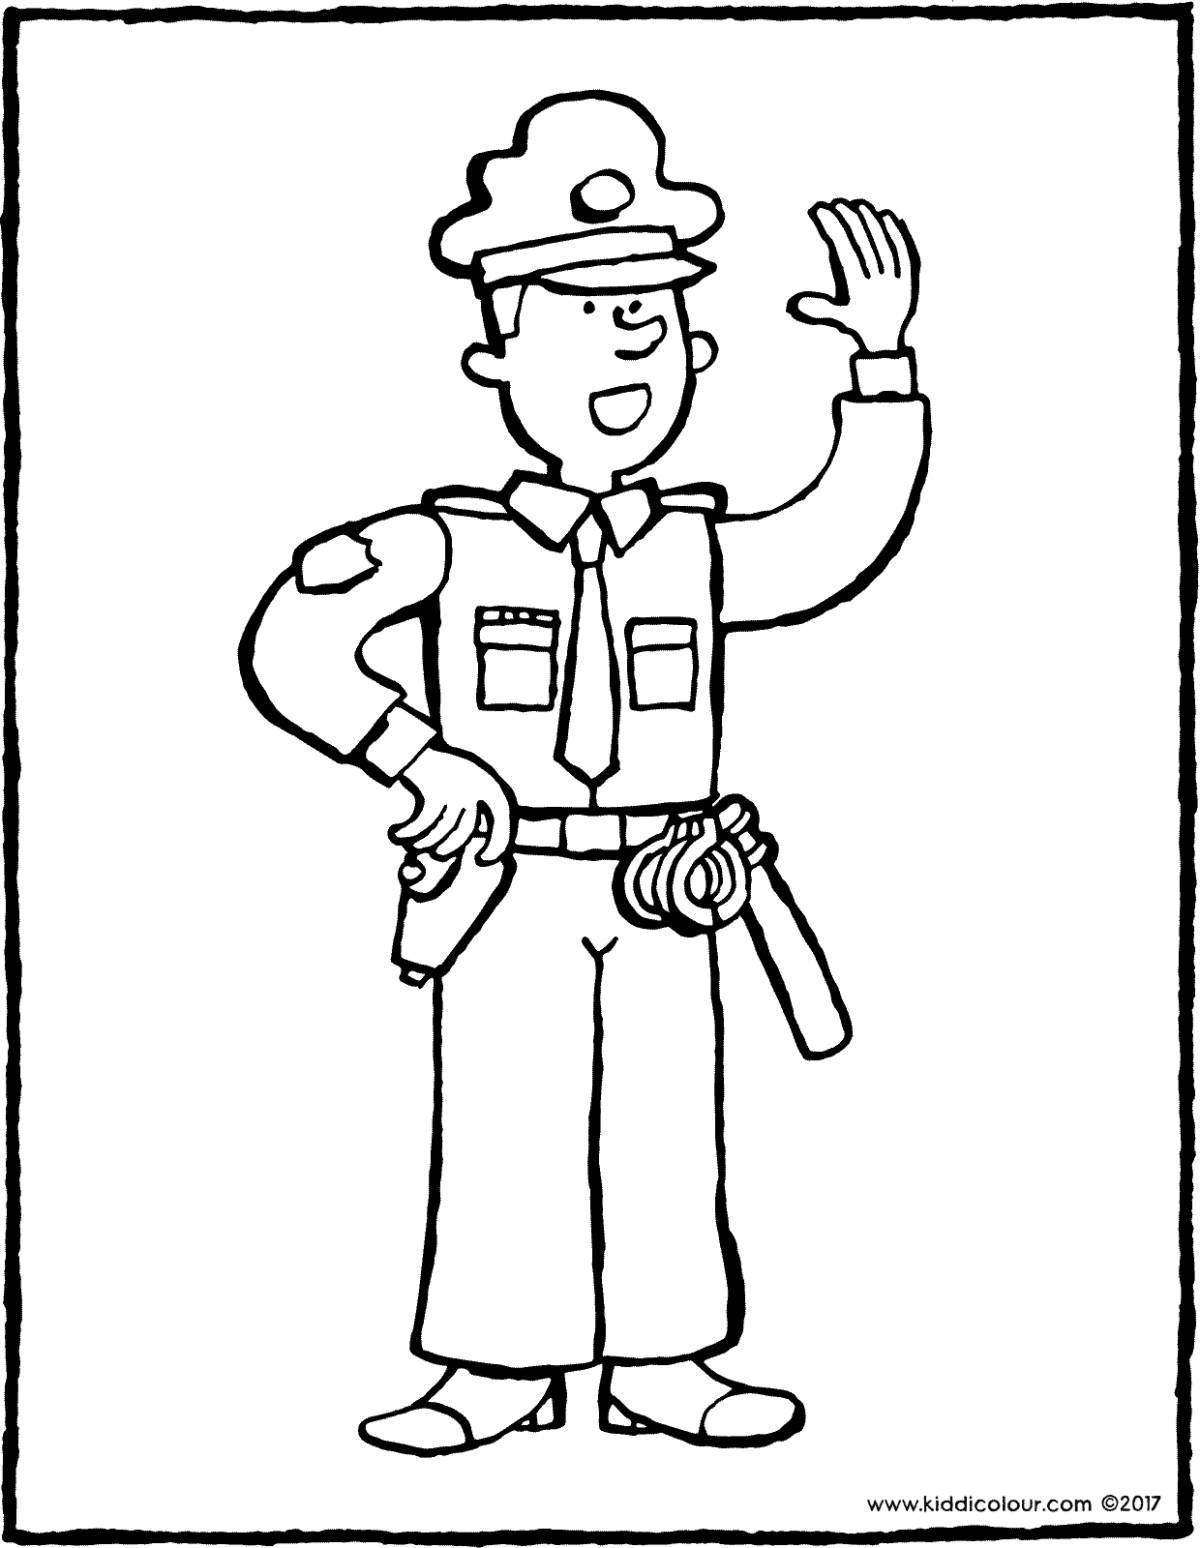 Coloring page cheerful traffic controller for juniors